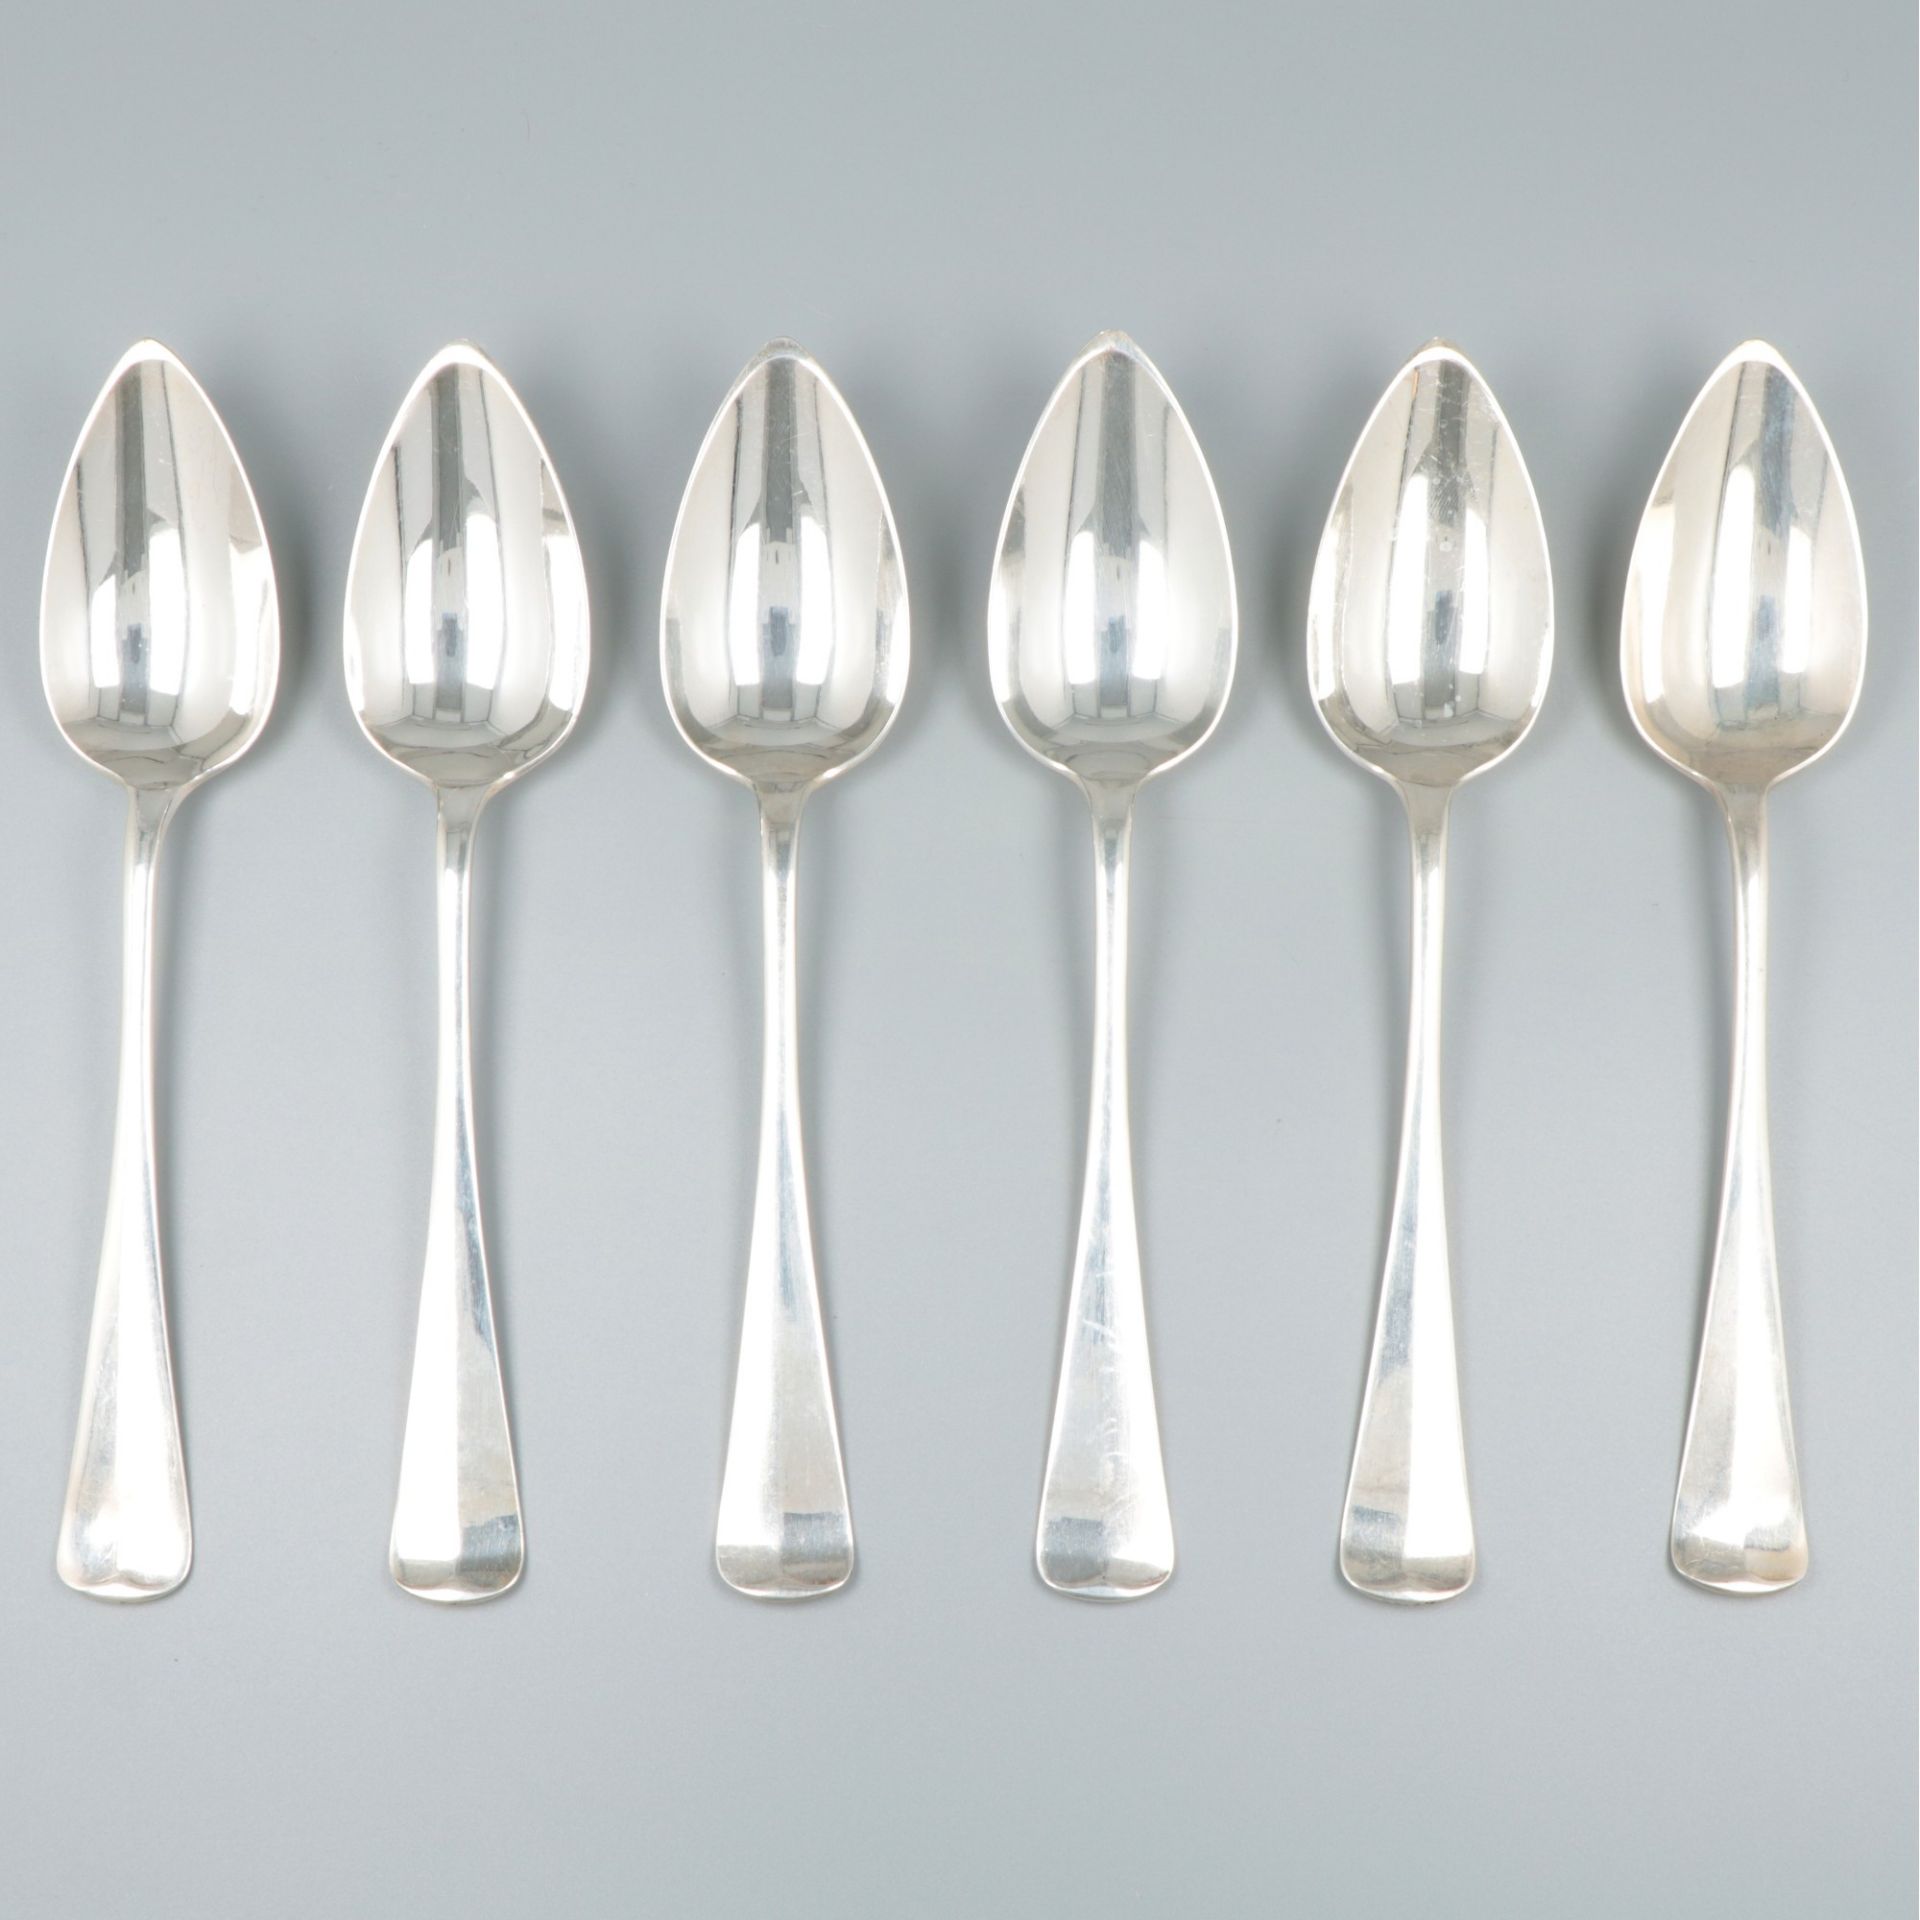 6-piece set dinner spoons "Haags Lofje", silver.